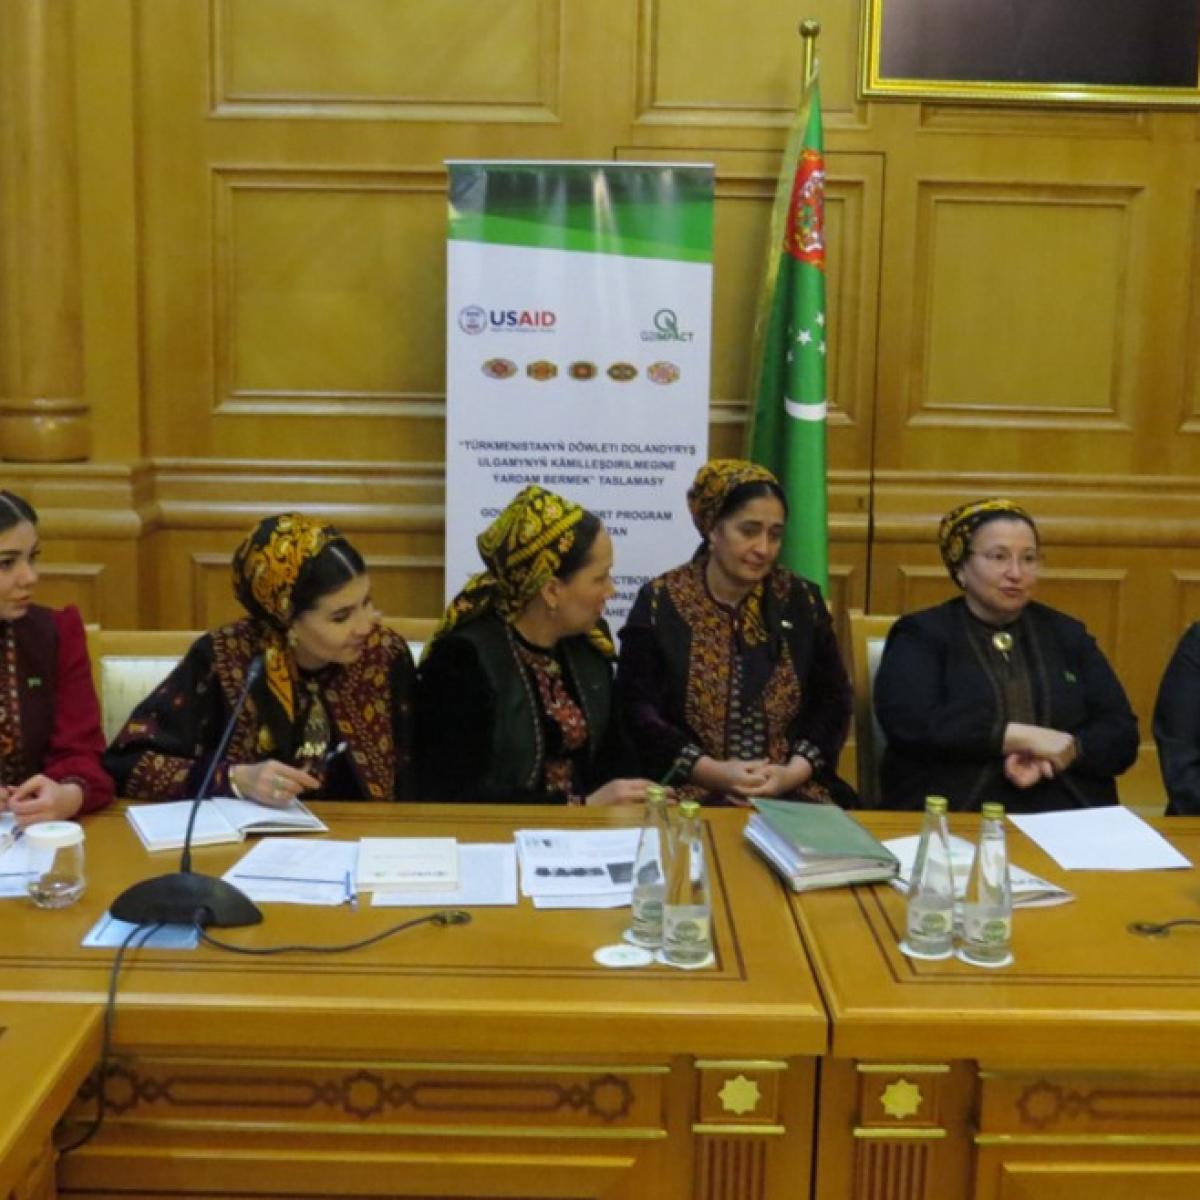 USAID AND WOMEN’S UNION OF TURKMENISTAN PROMOTE GENDER EQUALITY IN TURKMENISTAN